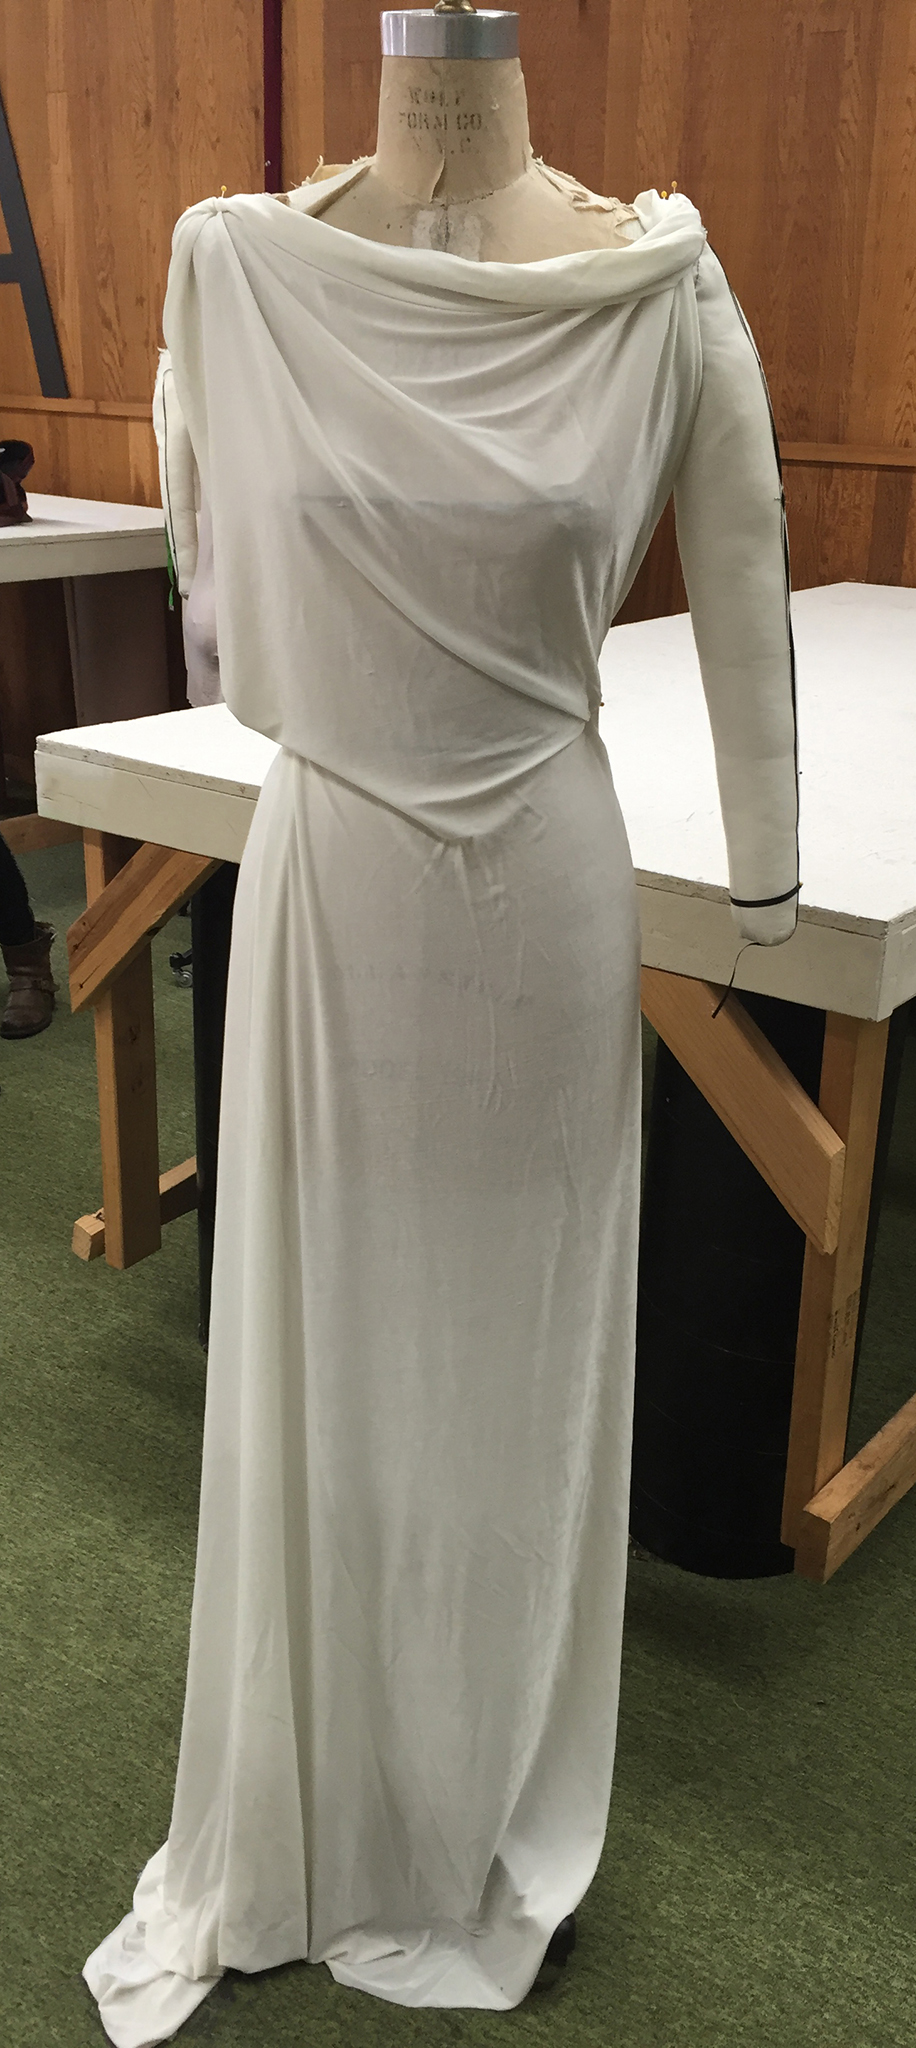 White knit fabric draped over a dress form.